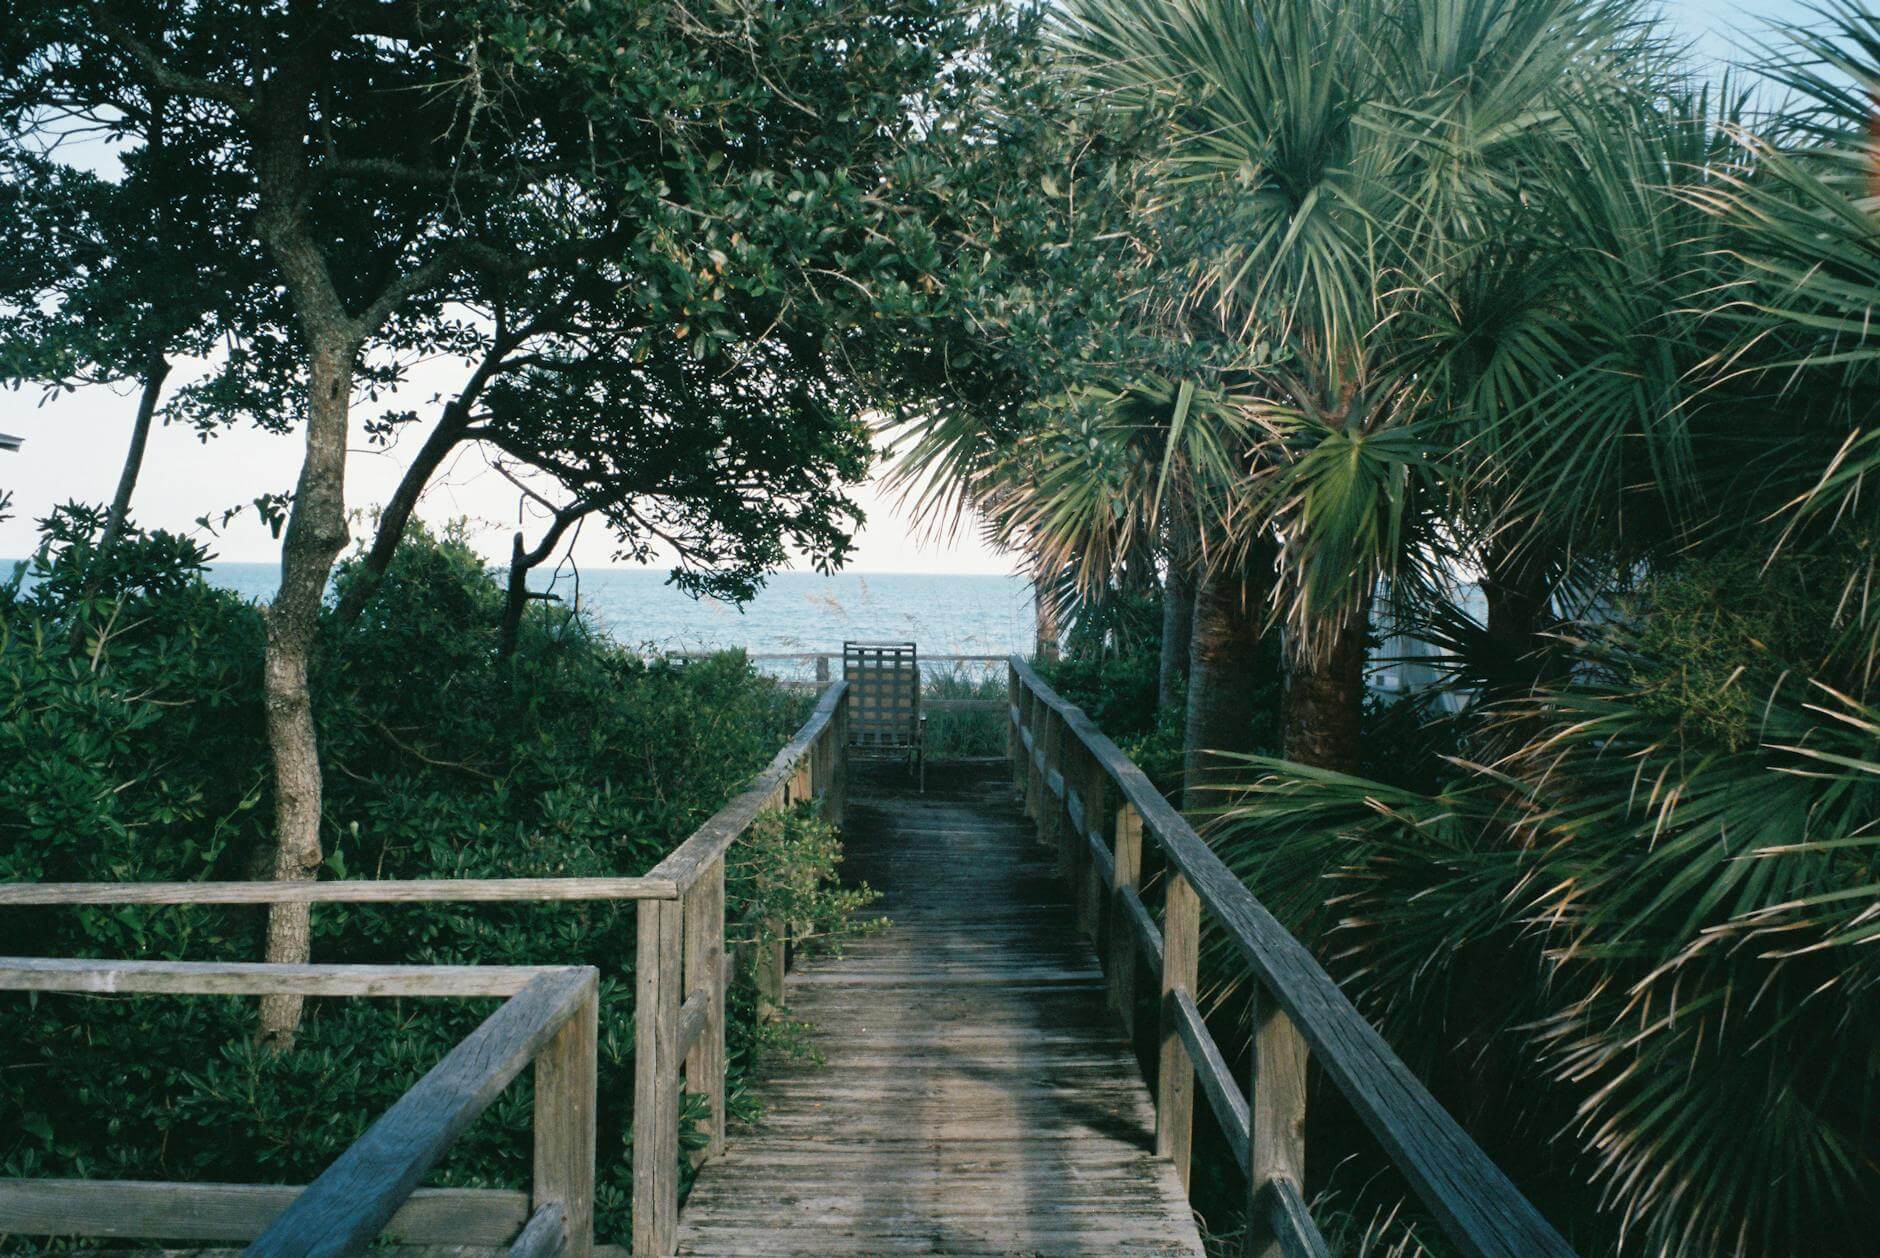 a wooden walkway leading to the beach with palm trees